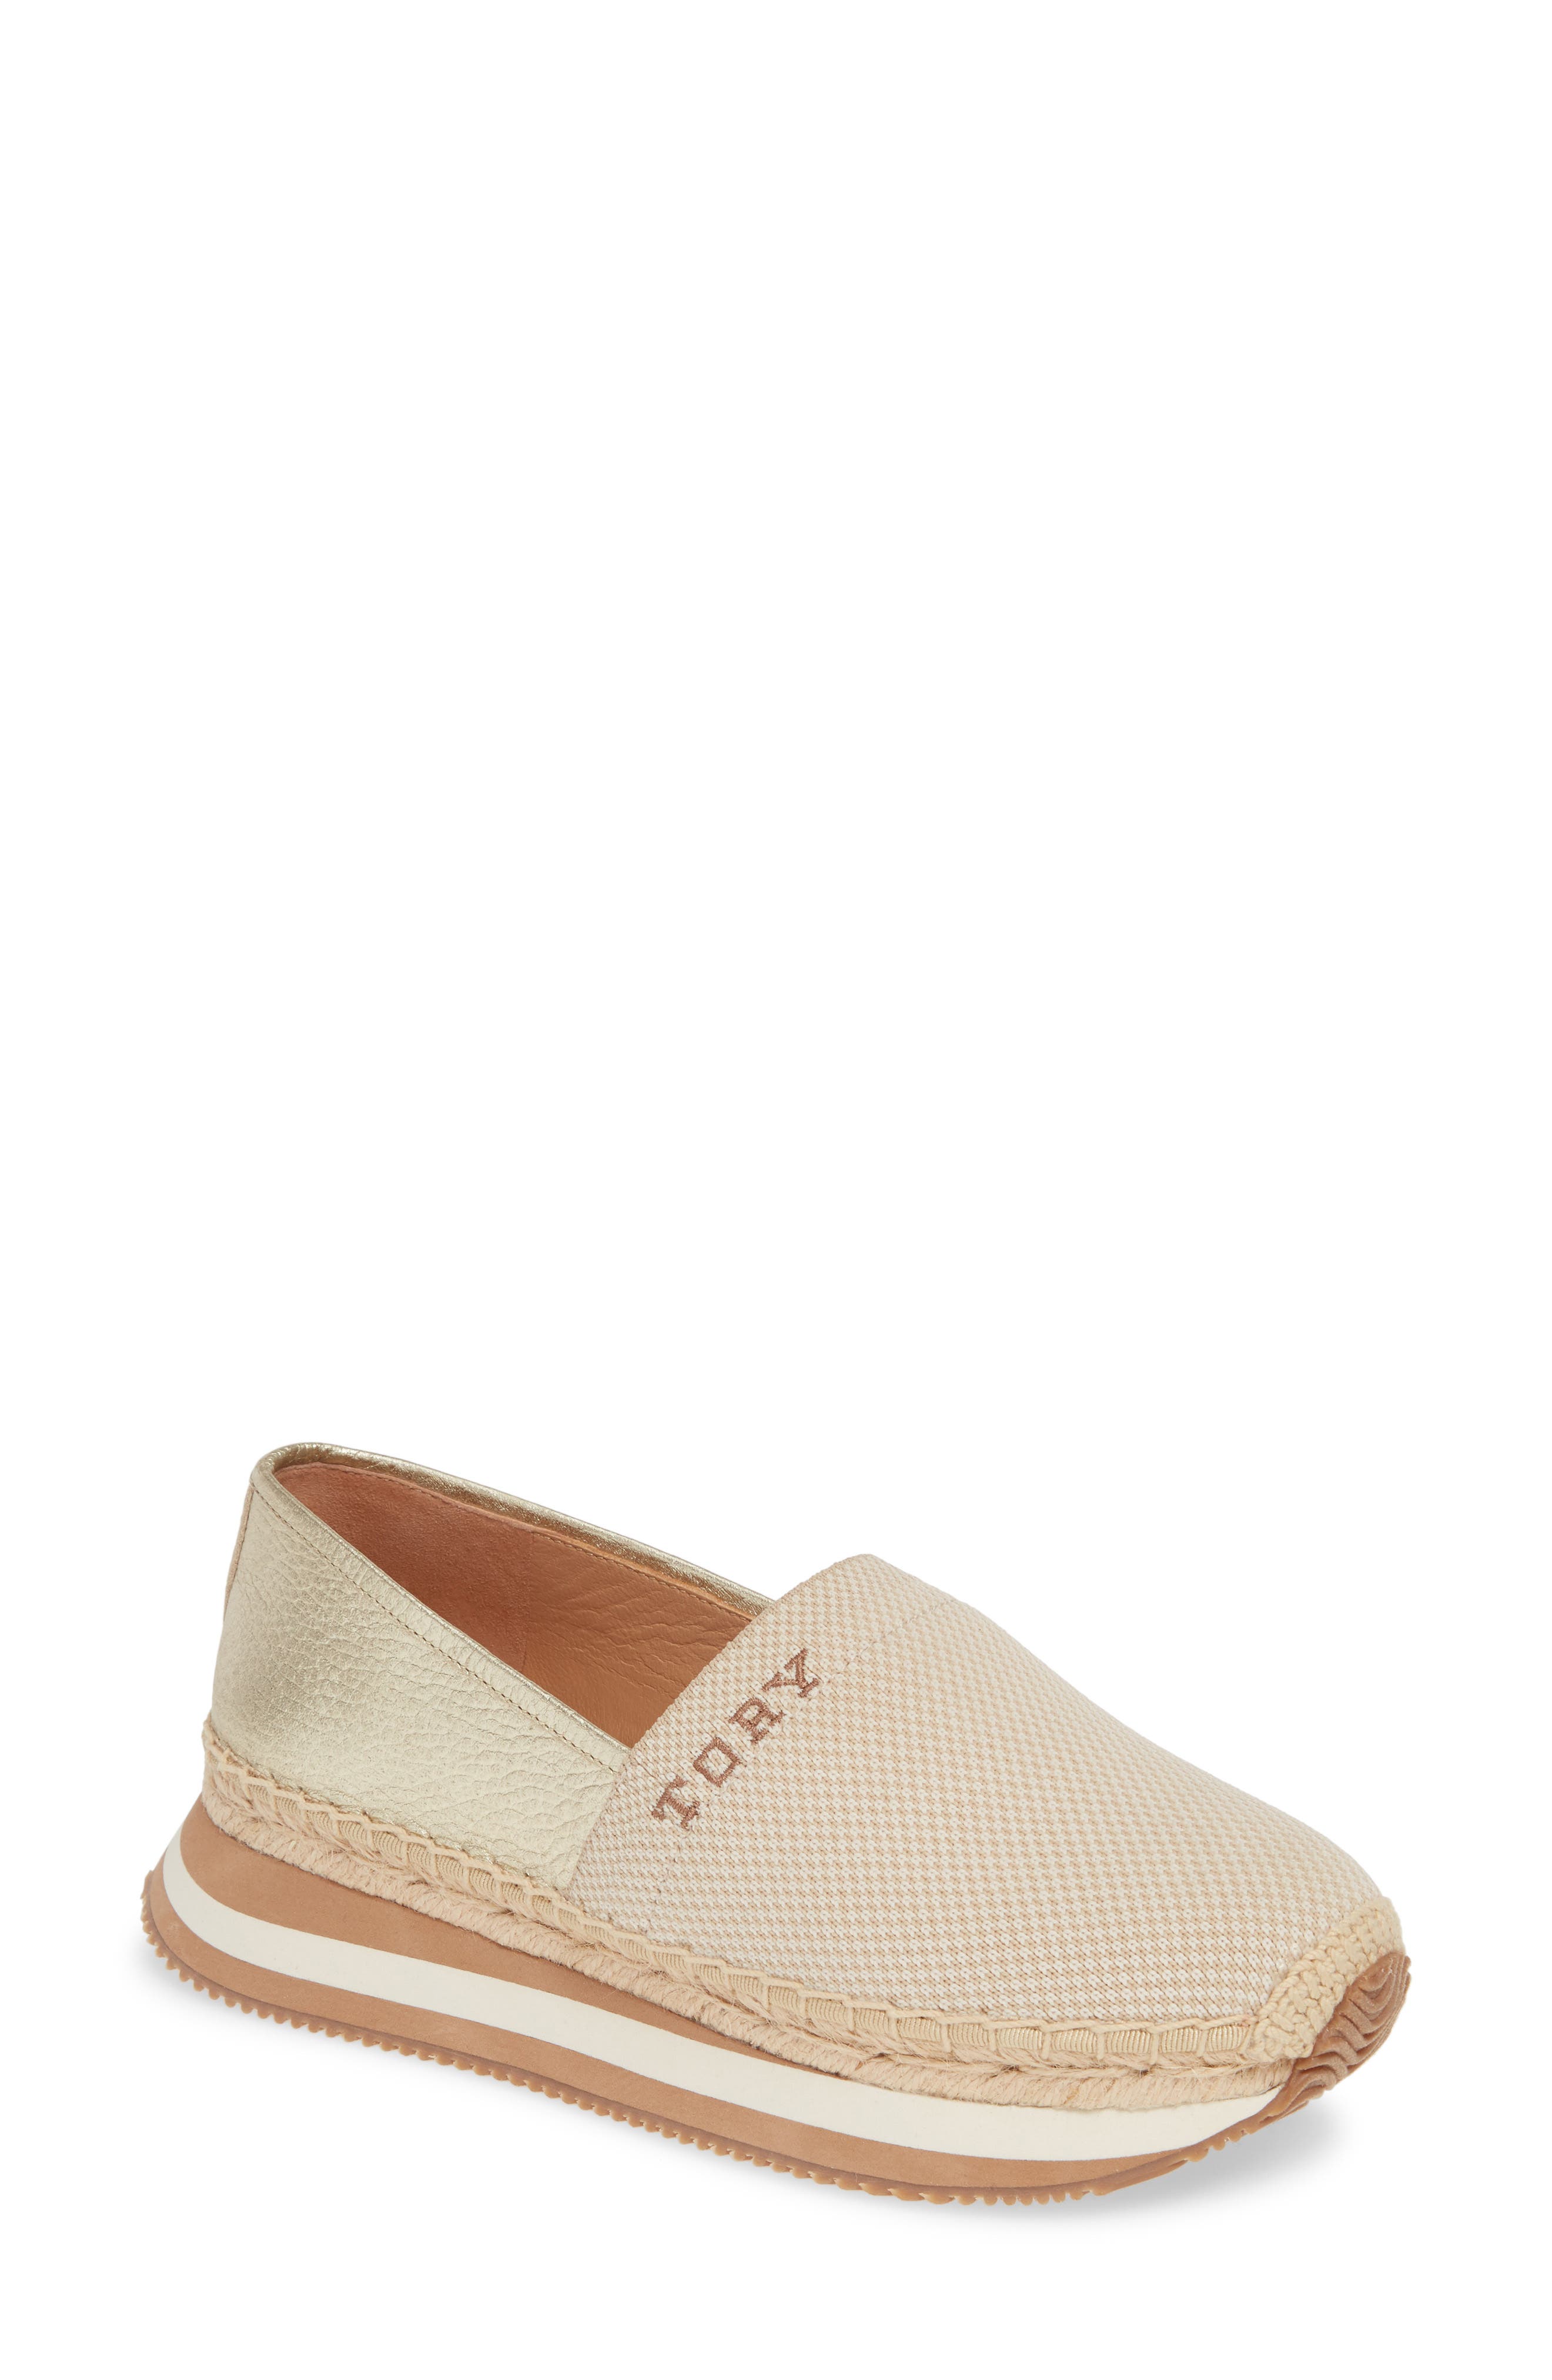 tory burch loafers nordstrom rack